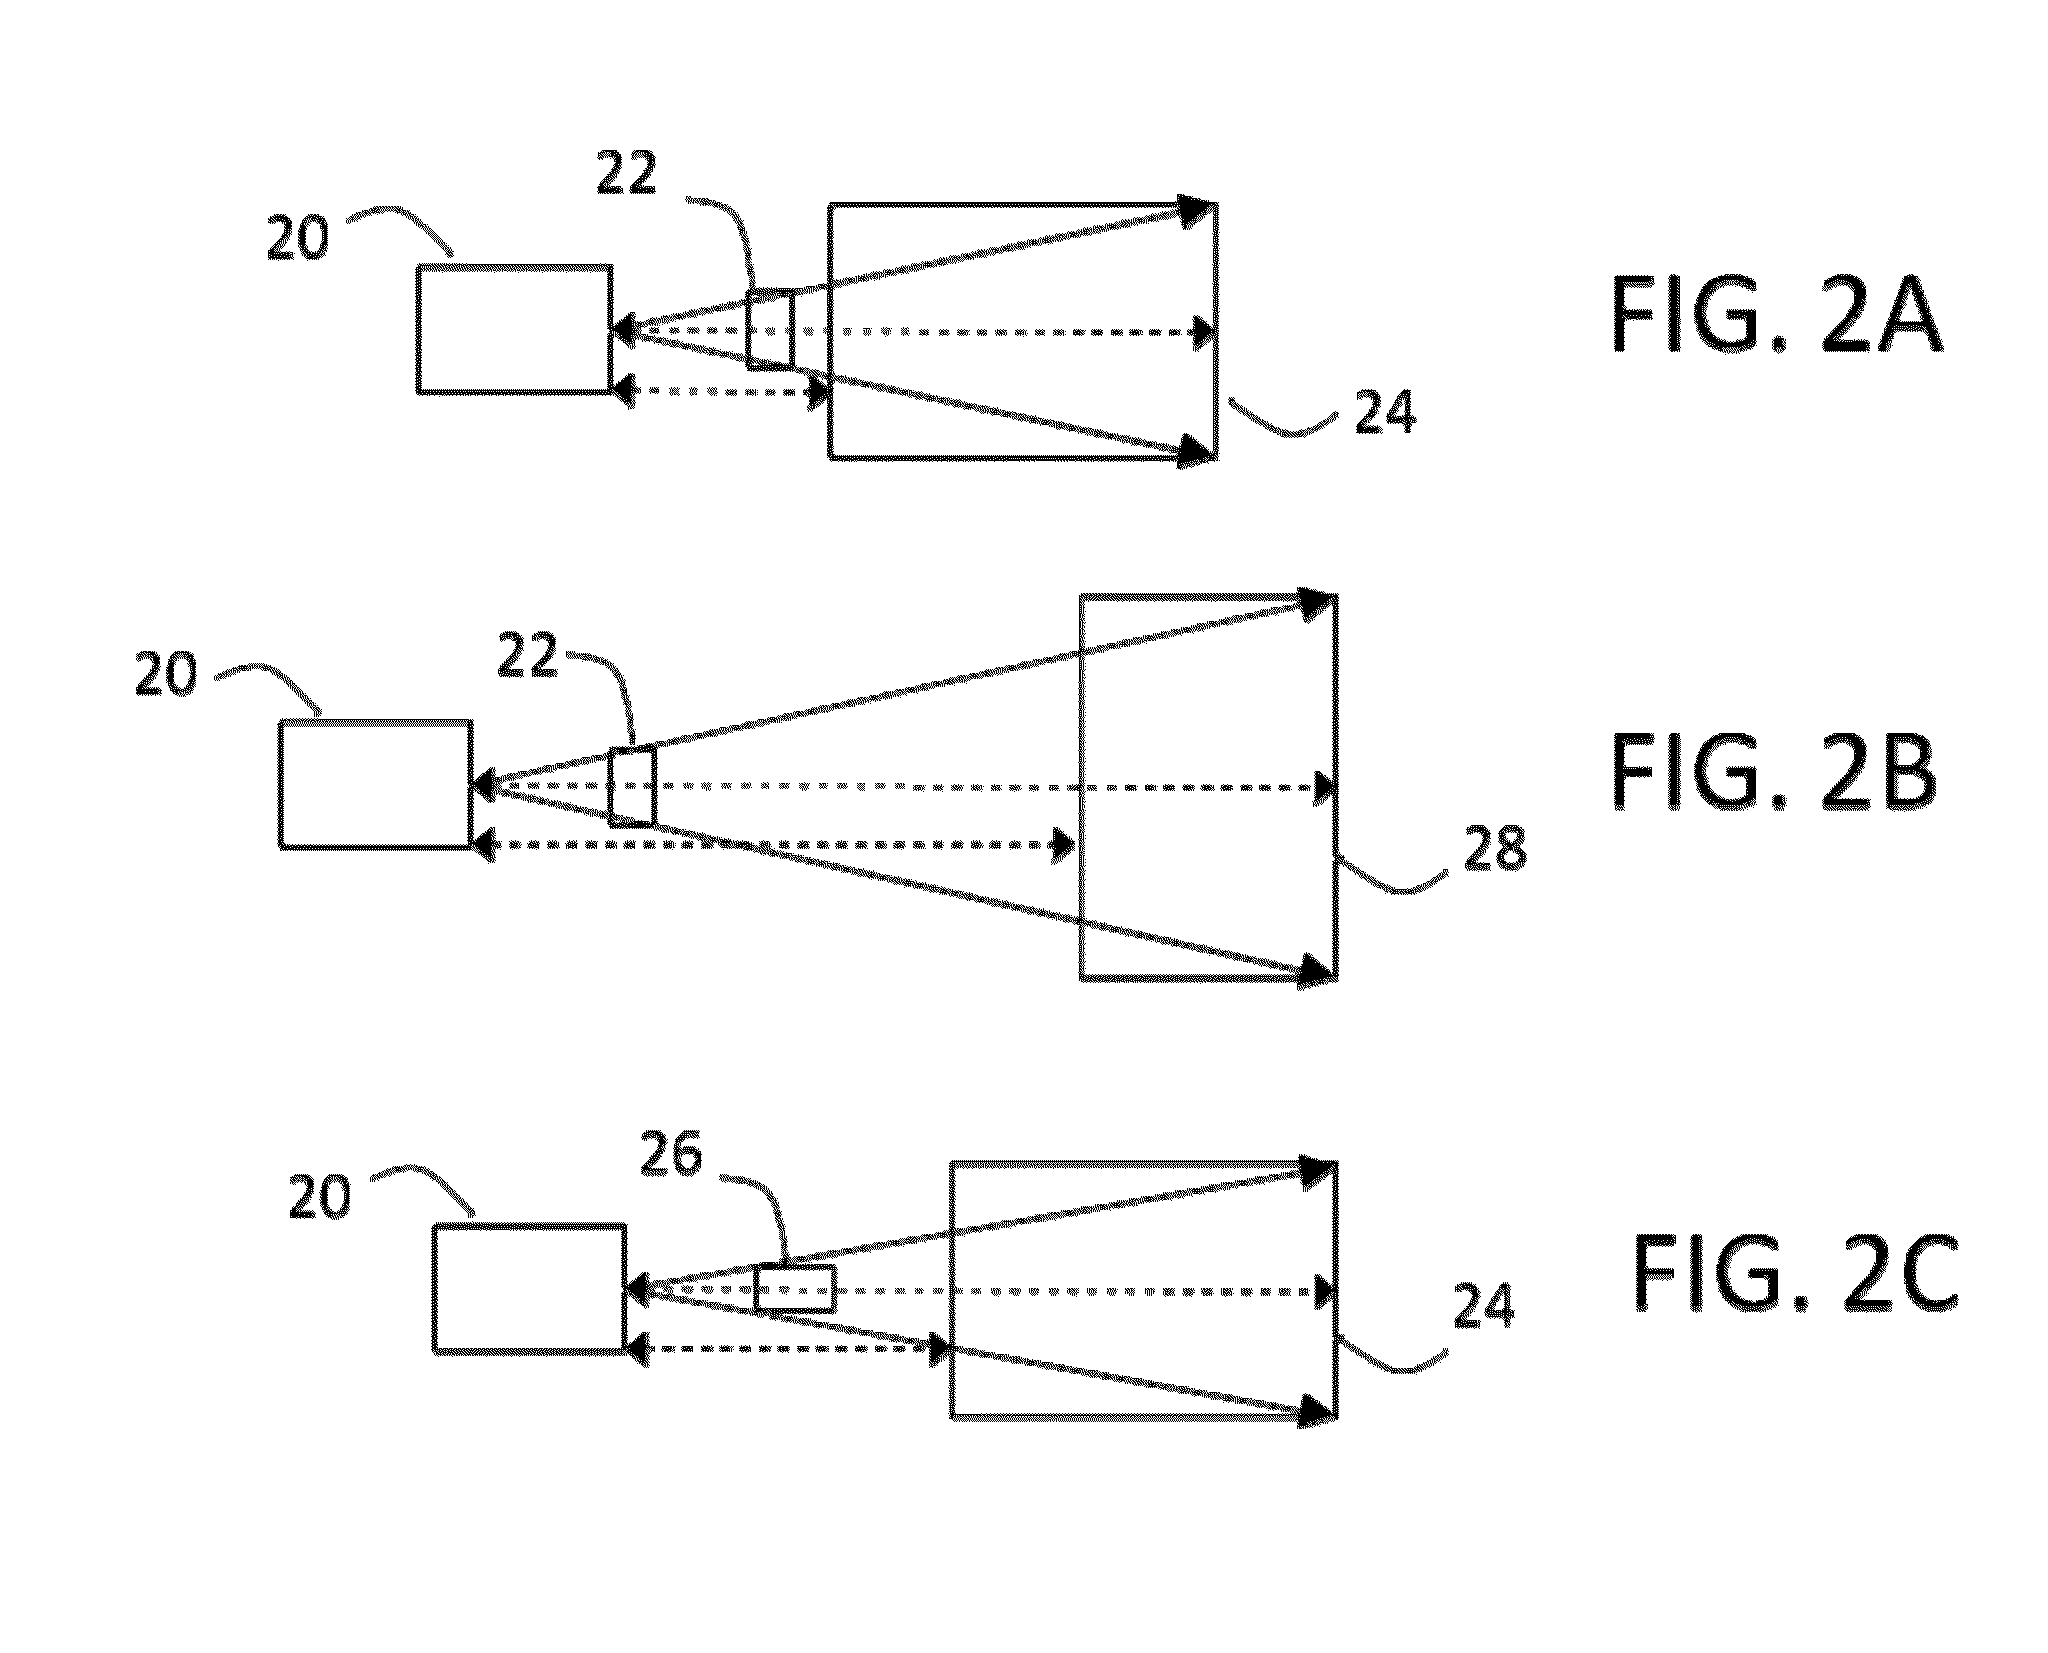 Illumination systems for reflective displays